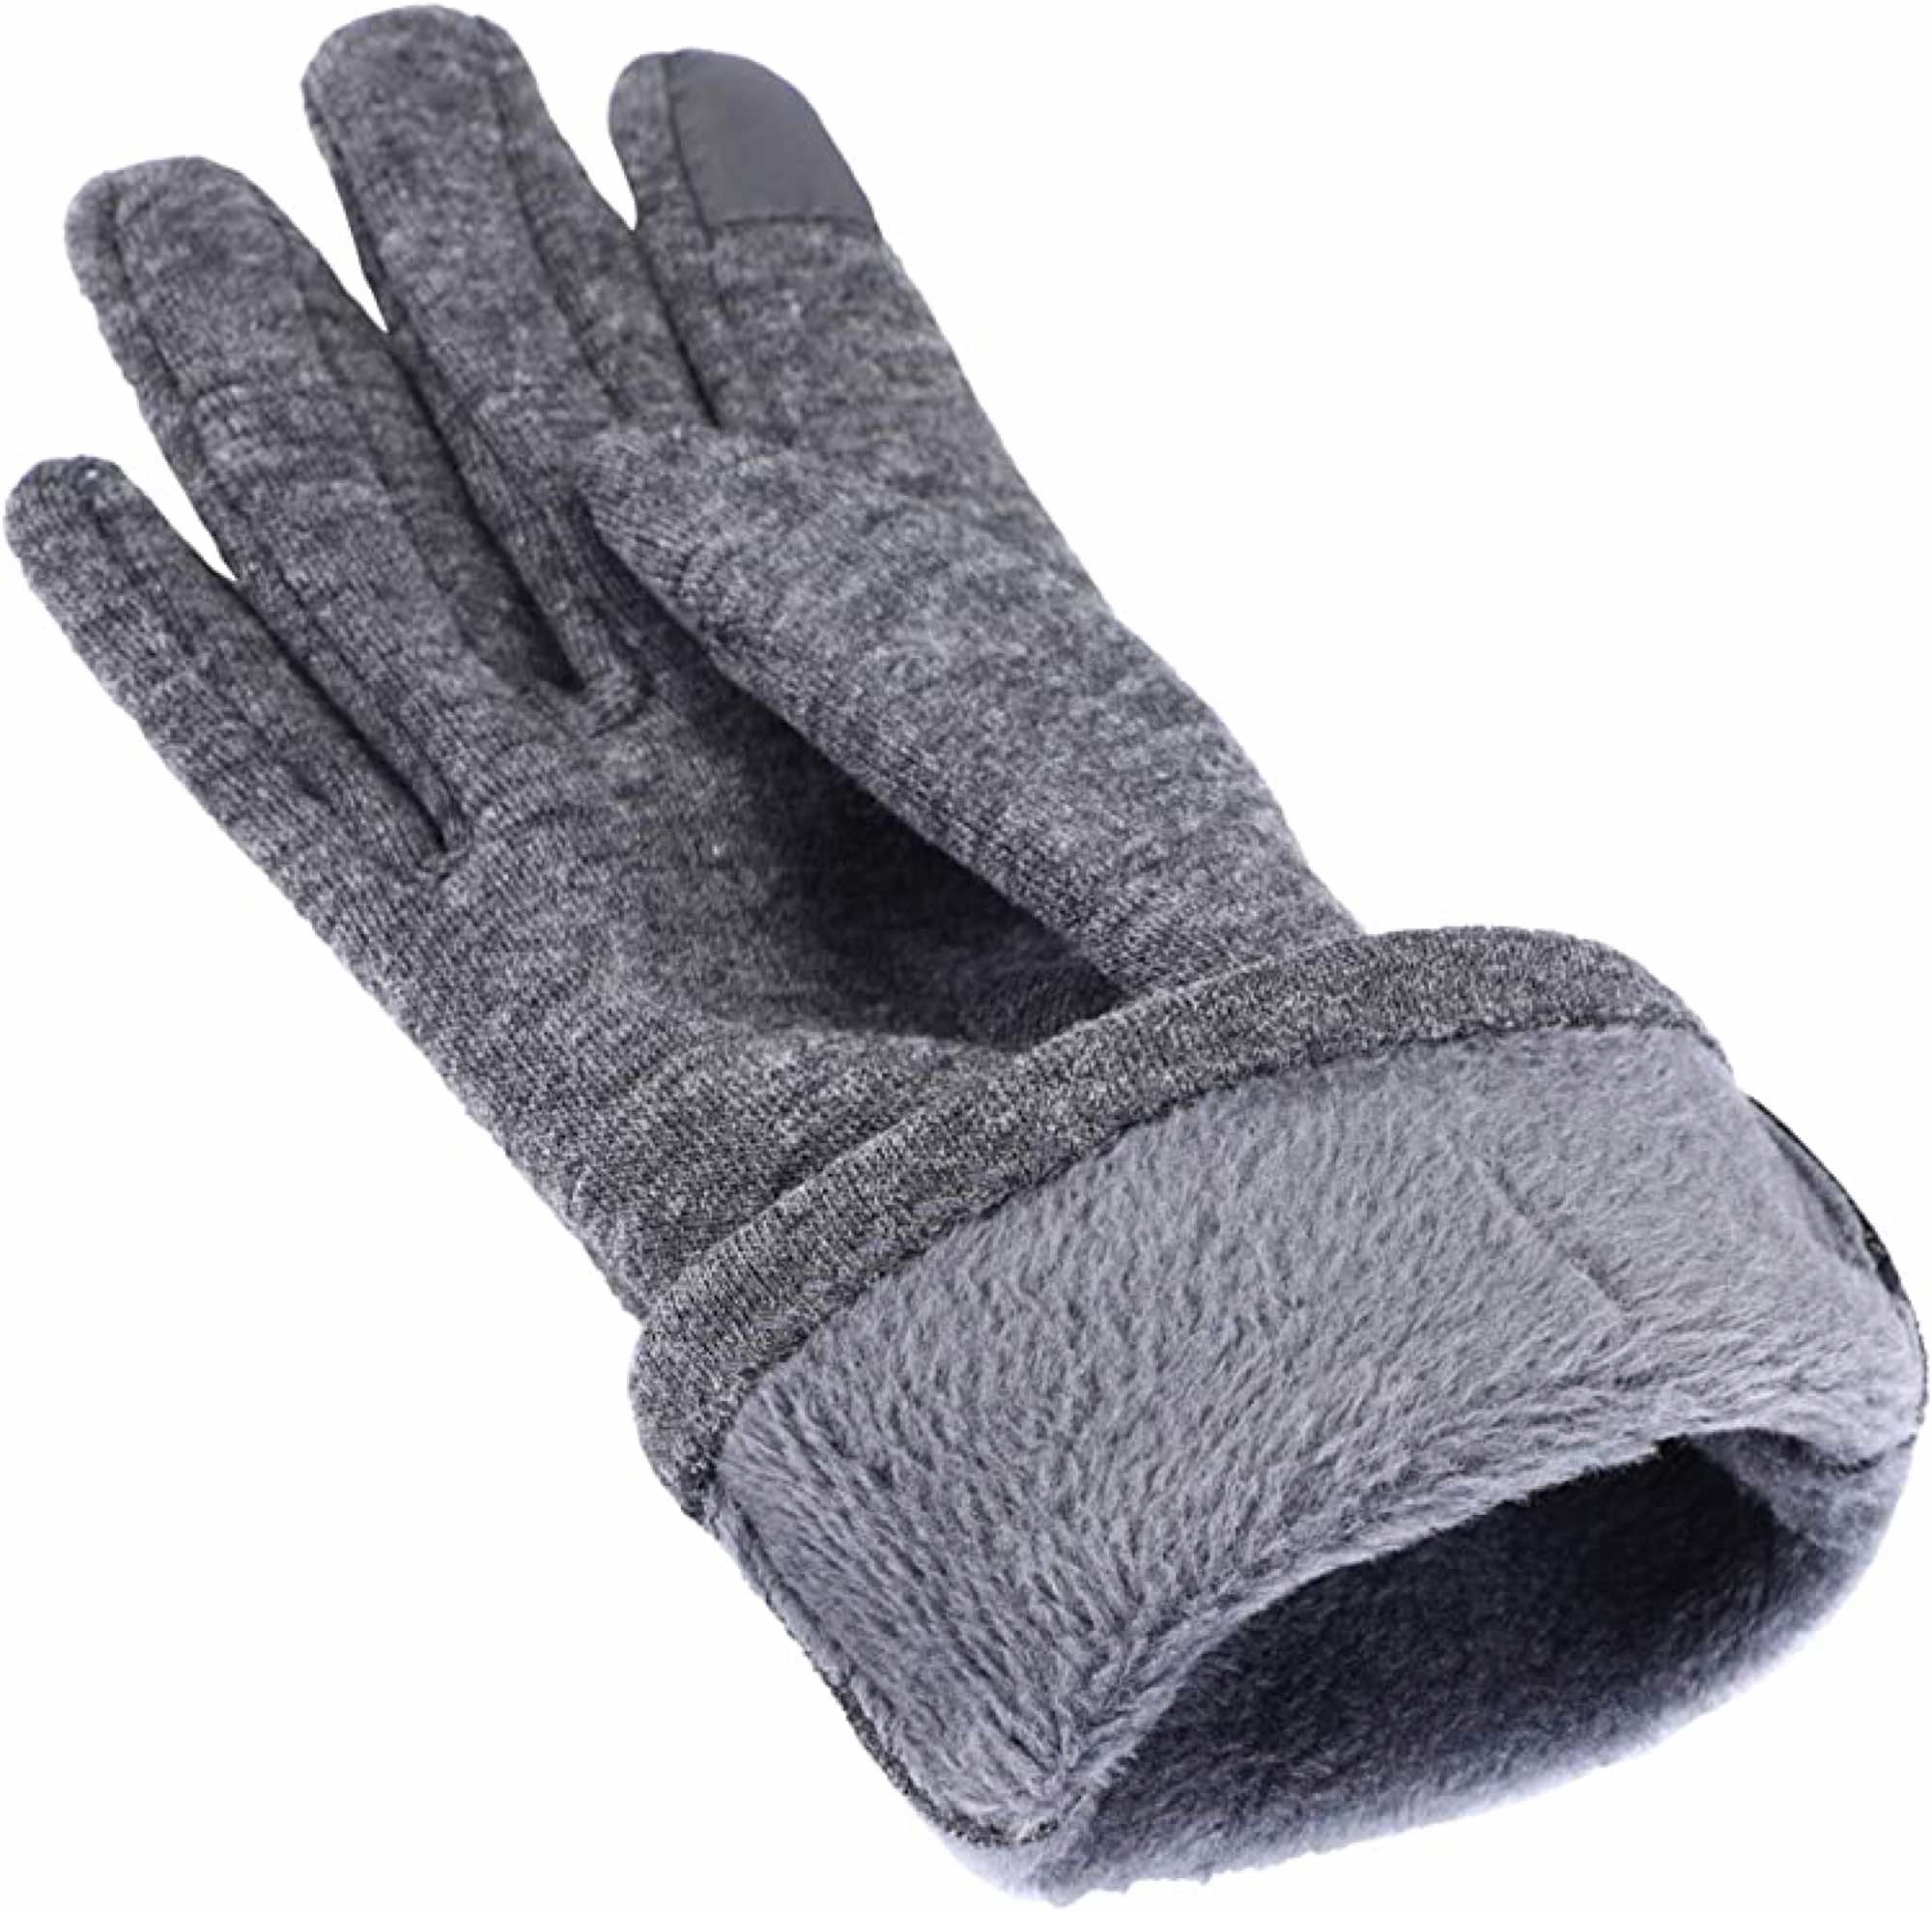 Winter Gloves Women, Touch Screen Gloves, Warm Fleece Lined Gloves, One Size for M, S - Grey-8